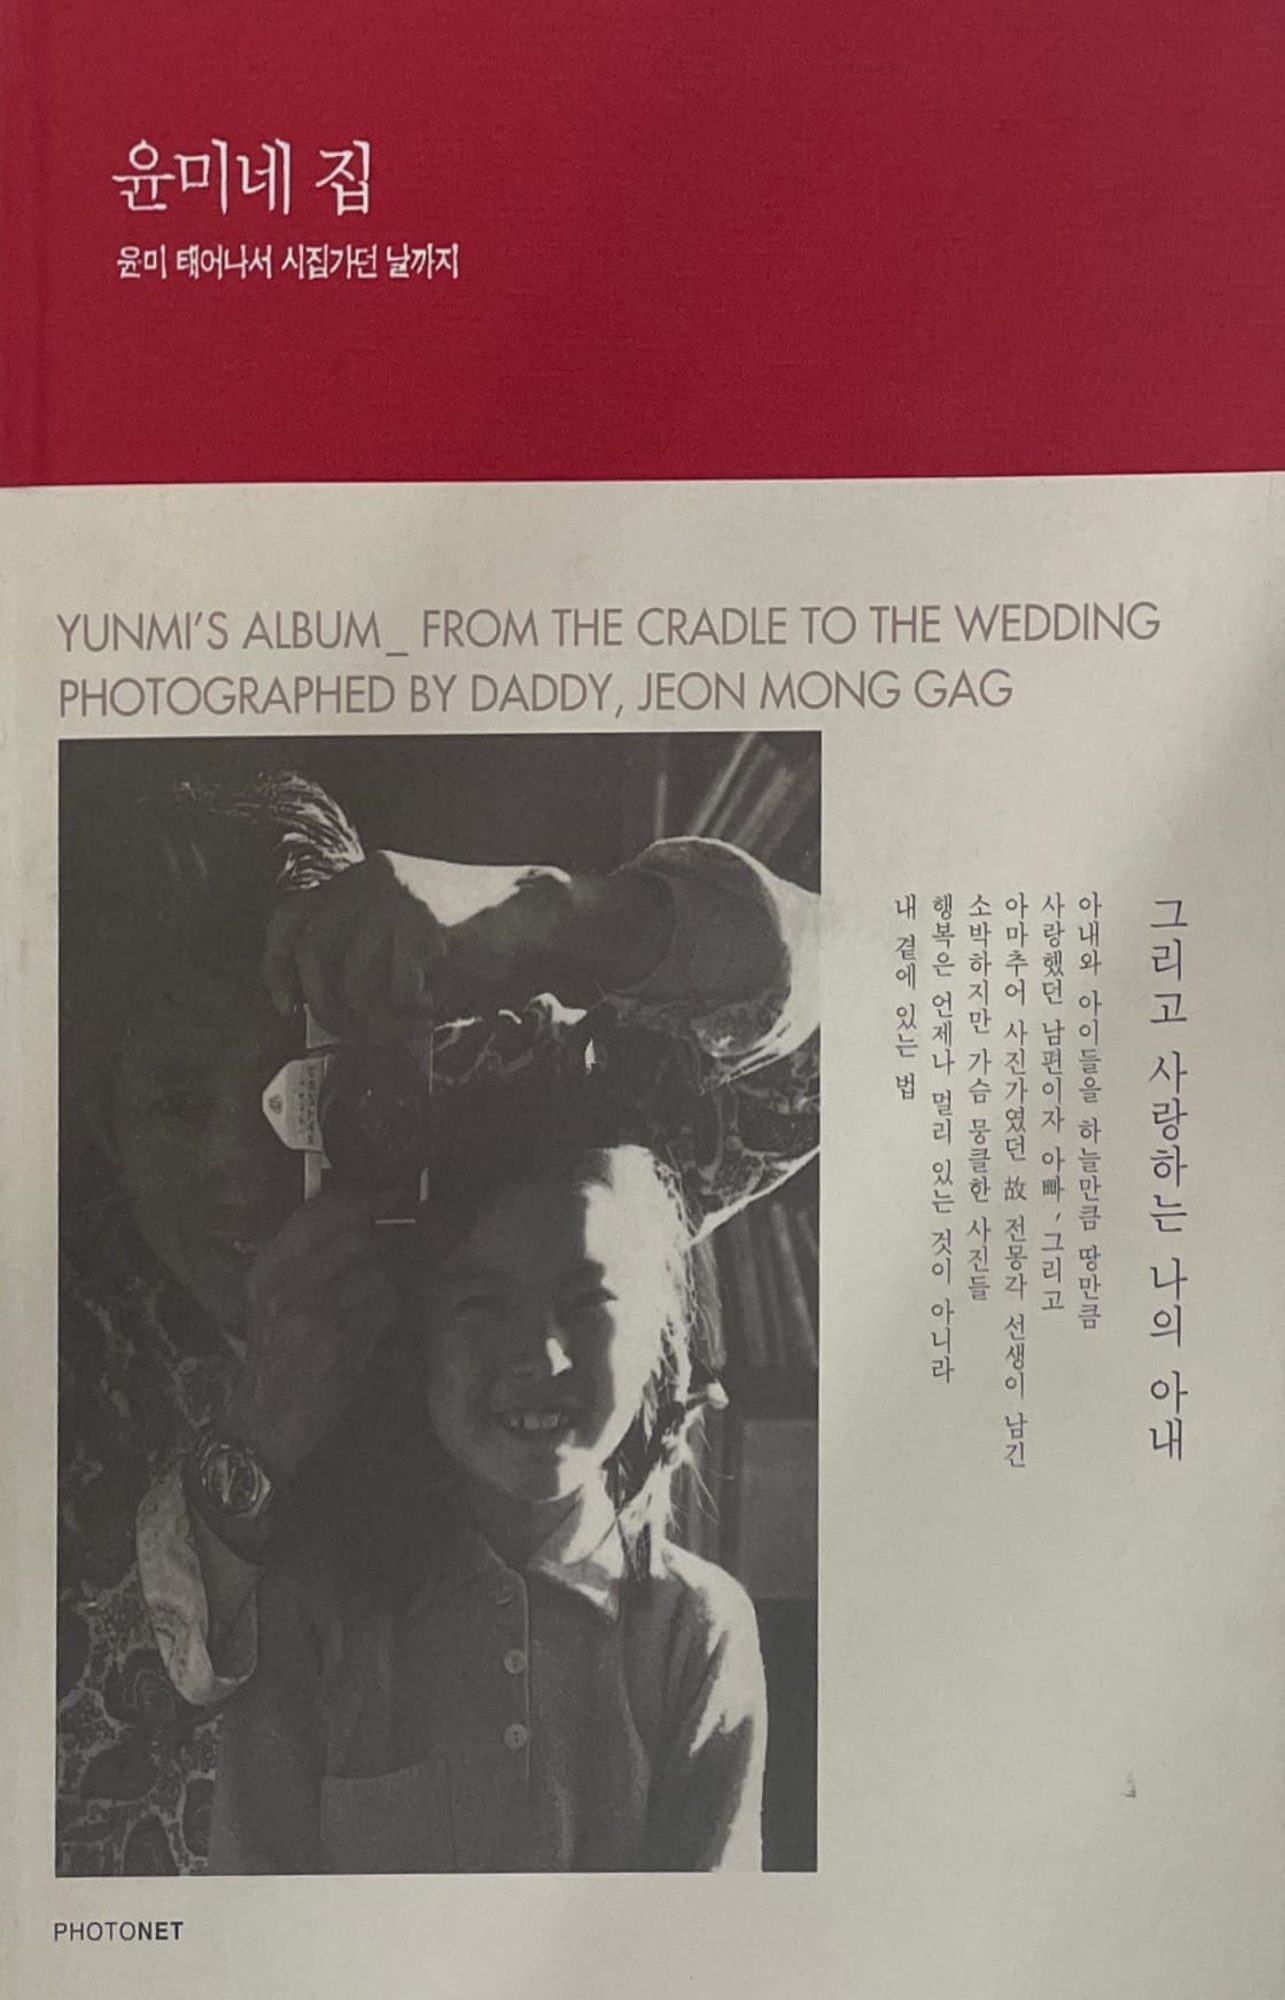 Yunmi's Album - From the Cradle to the Wedding, Jeon Mong Gag